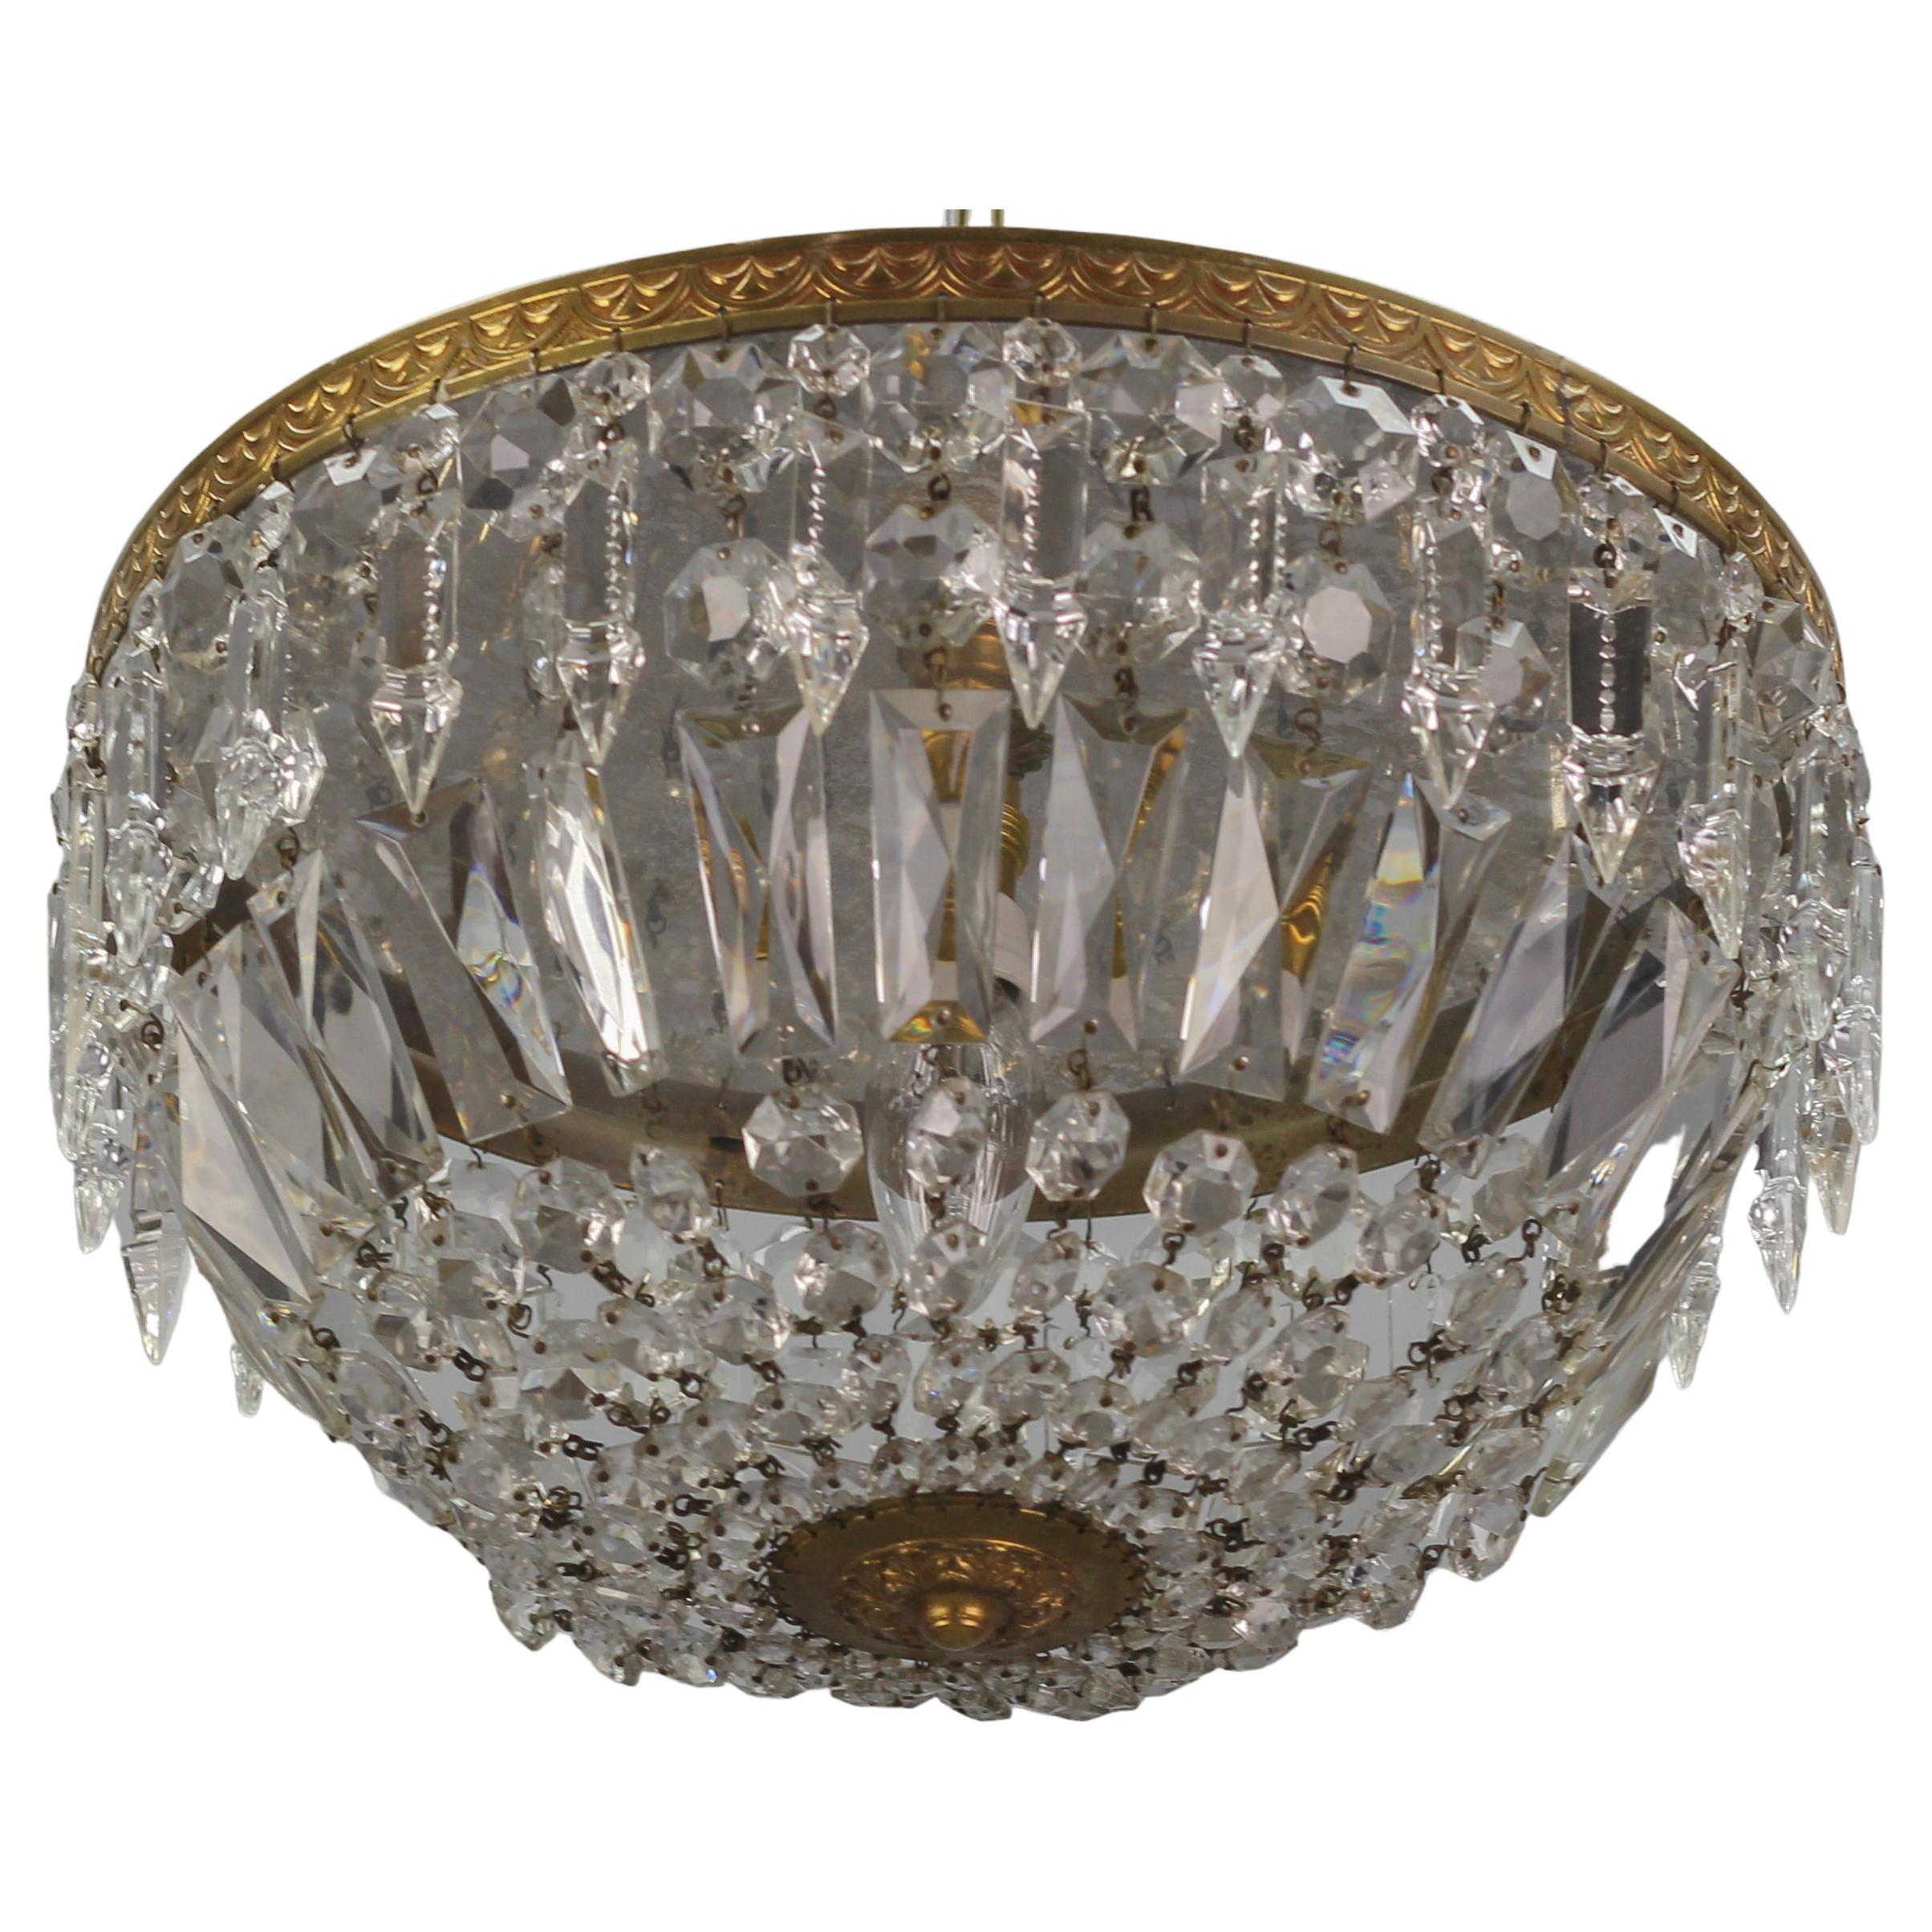 French Art Deco Style Crystal Glass and Brass Basket Ceiling Light Fixture